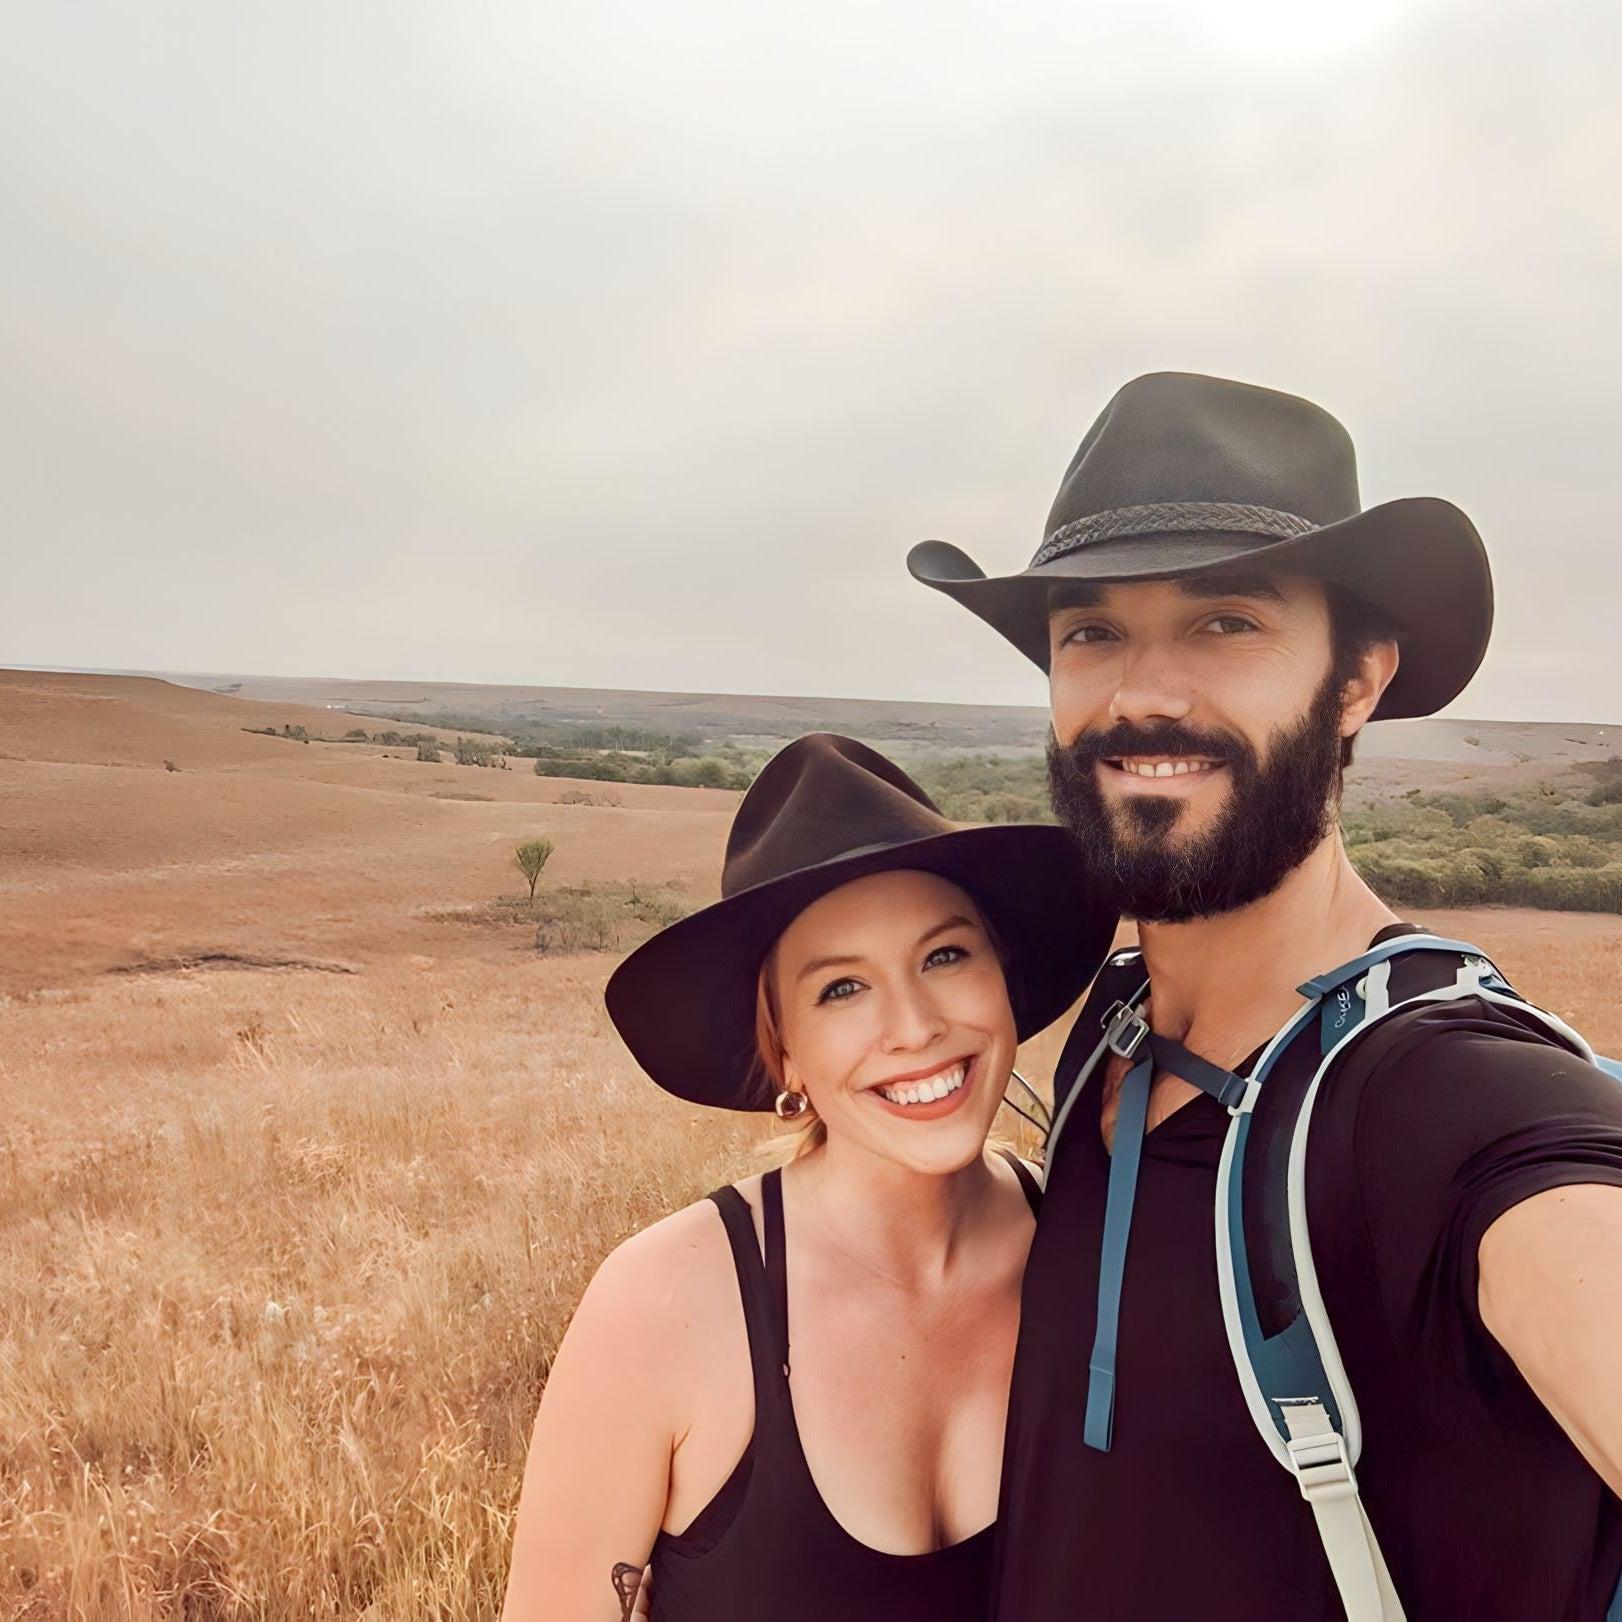 A happy hiking couple stop their way for a selfie photo in their new Agnoulita outdoor hats